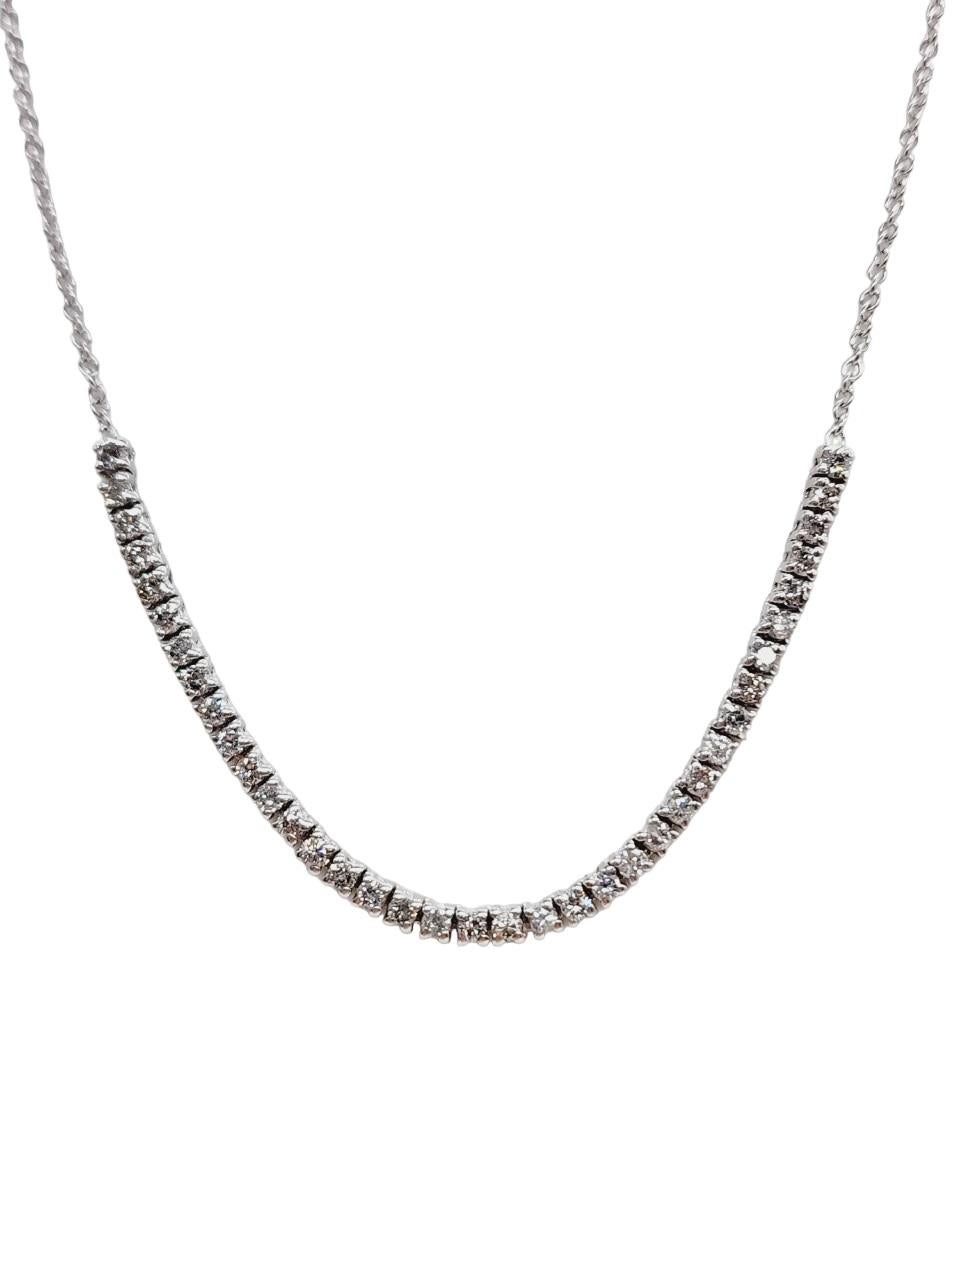 Brilliant and beautiful mini tennis necklace, natural round-brilliant cut white diamonds clean and Excellent shine.
14k white gold classic four-prong style for maximum light brilliance. 
24 inch length. Average G Color, SI Clarity. 